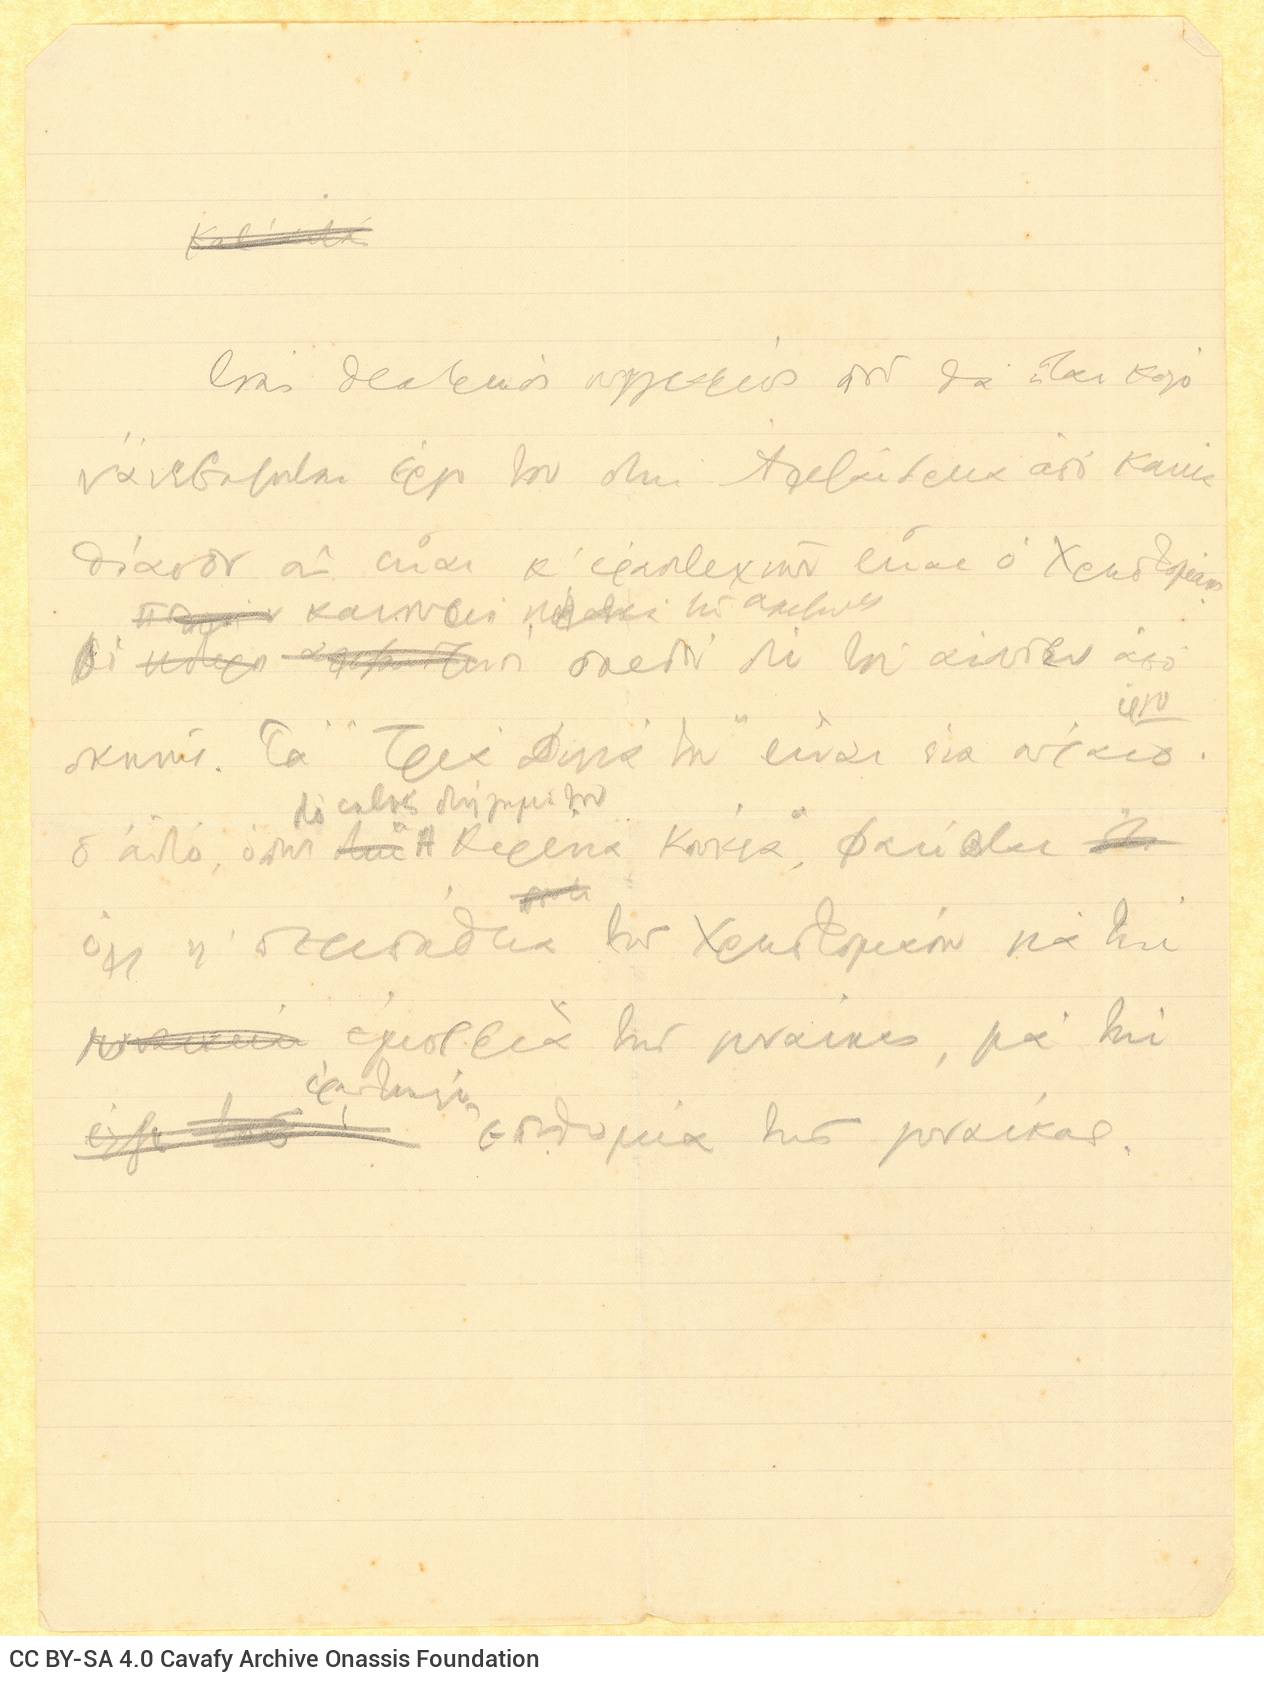 Handwritten notes on one side of a ruled sheet. Blank verso. Cavafy refers to Konstantinos Christomanos, noting that it wo